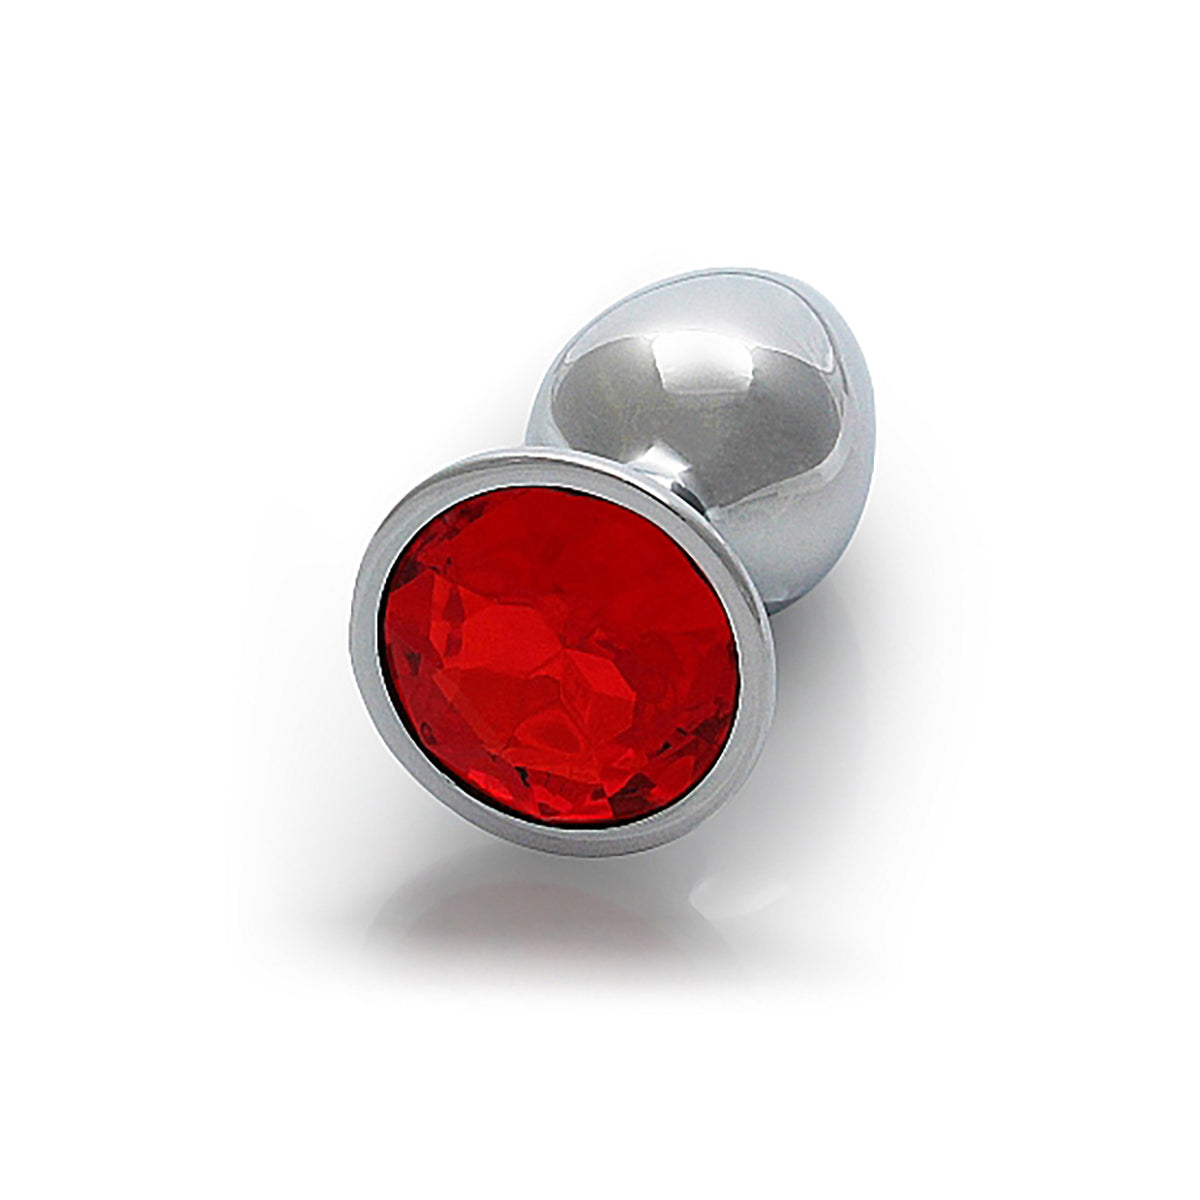 Shots Ouch! Round Gem Butt Plug Small - Silver/Ruby Red Small